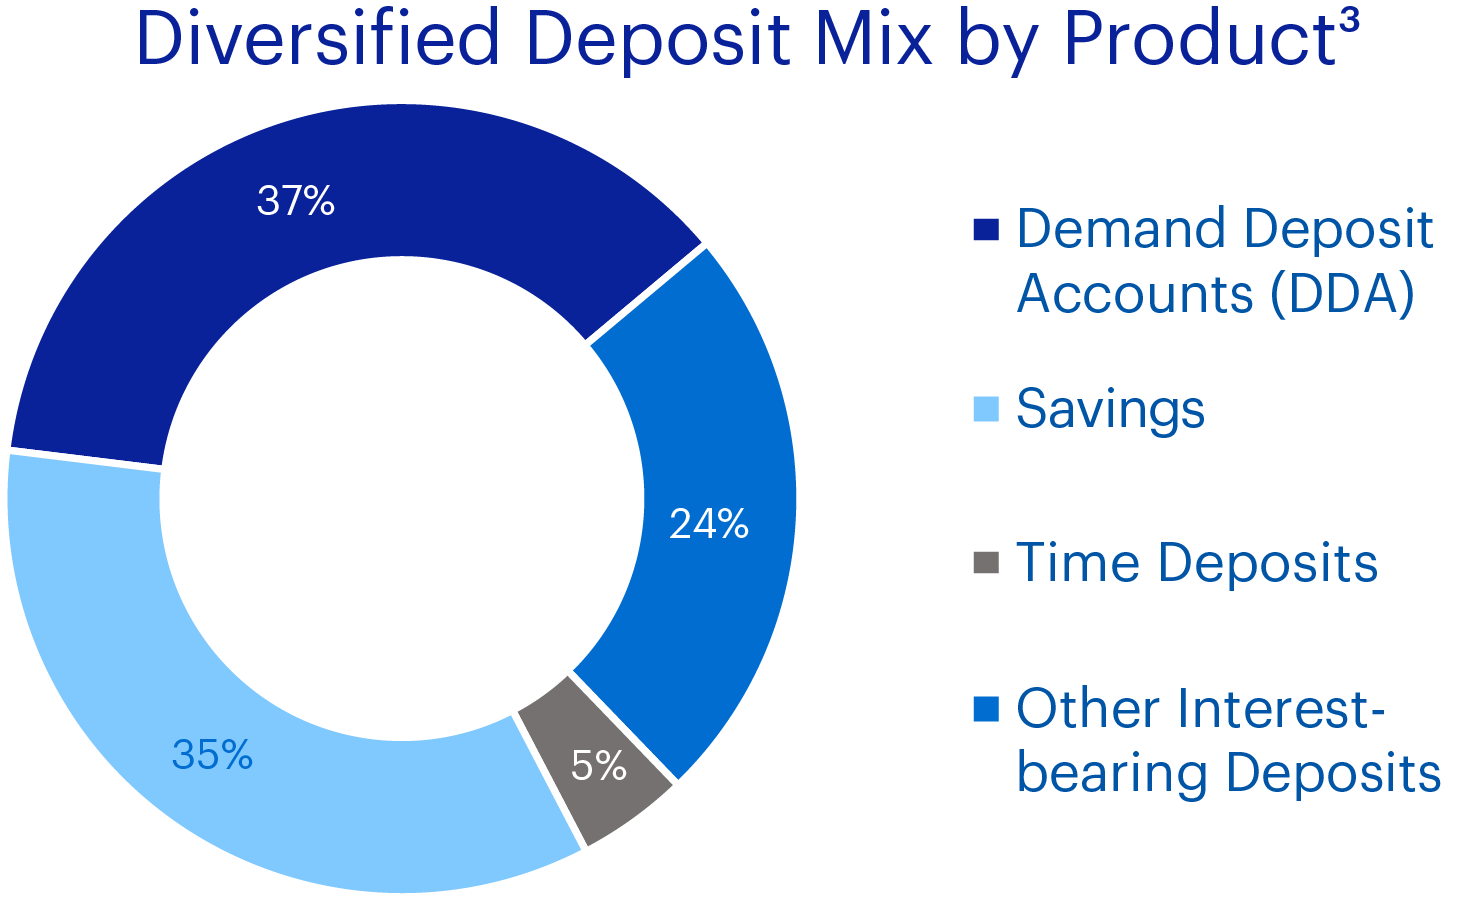 Diversified Deposit Mix by Product